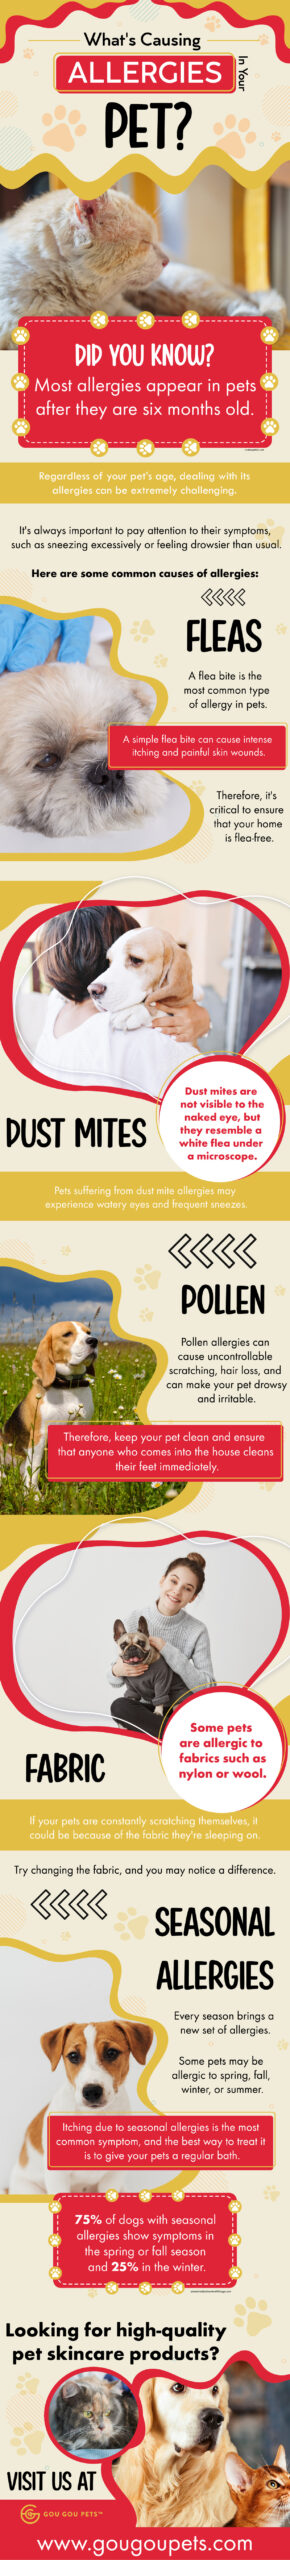 What's Causing Allergies In Your Pet?